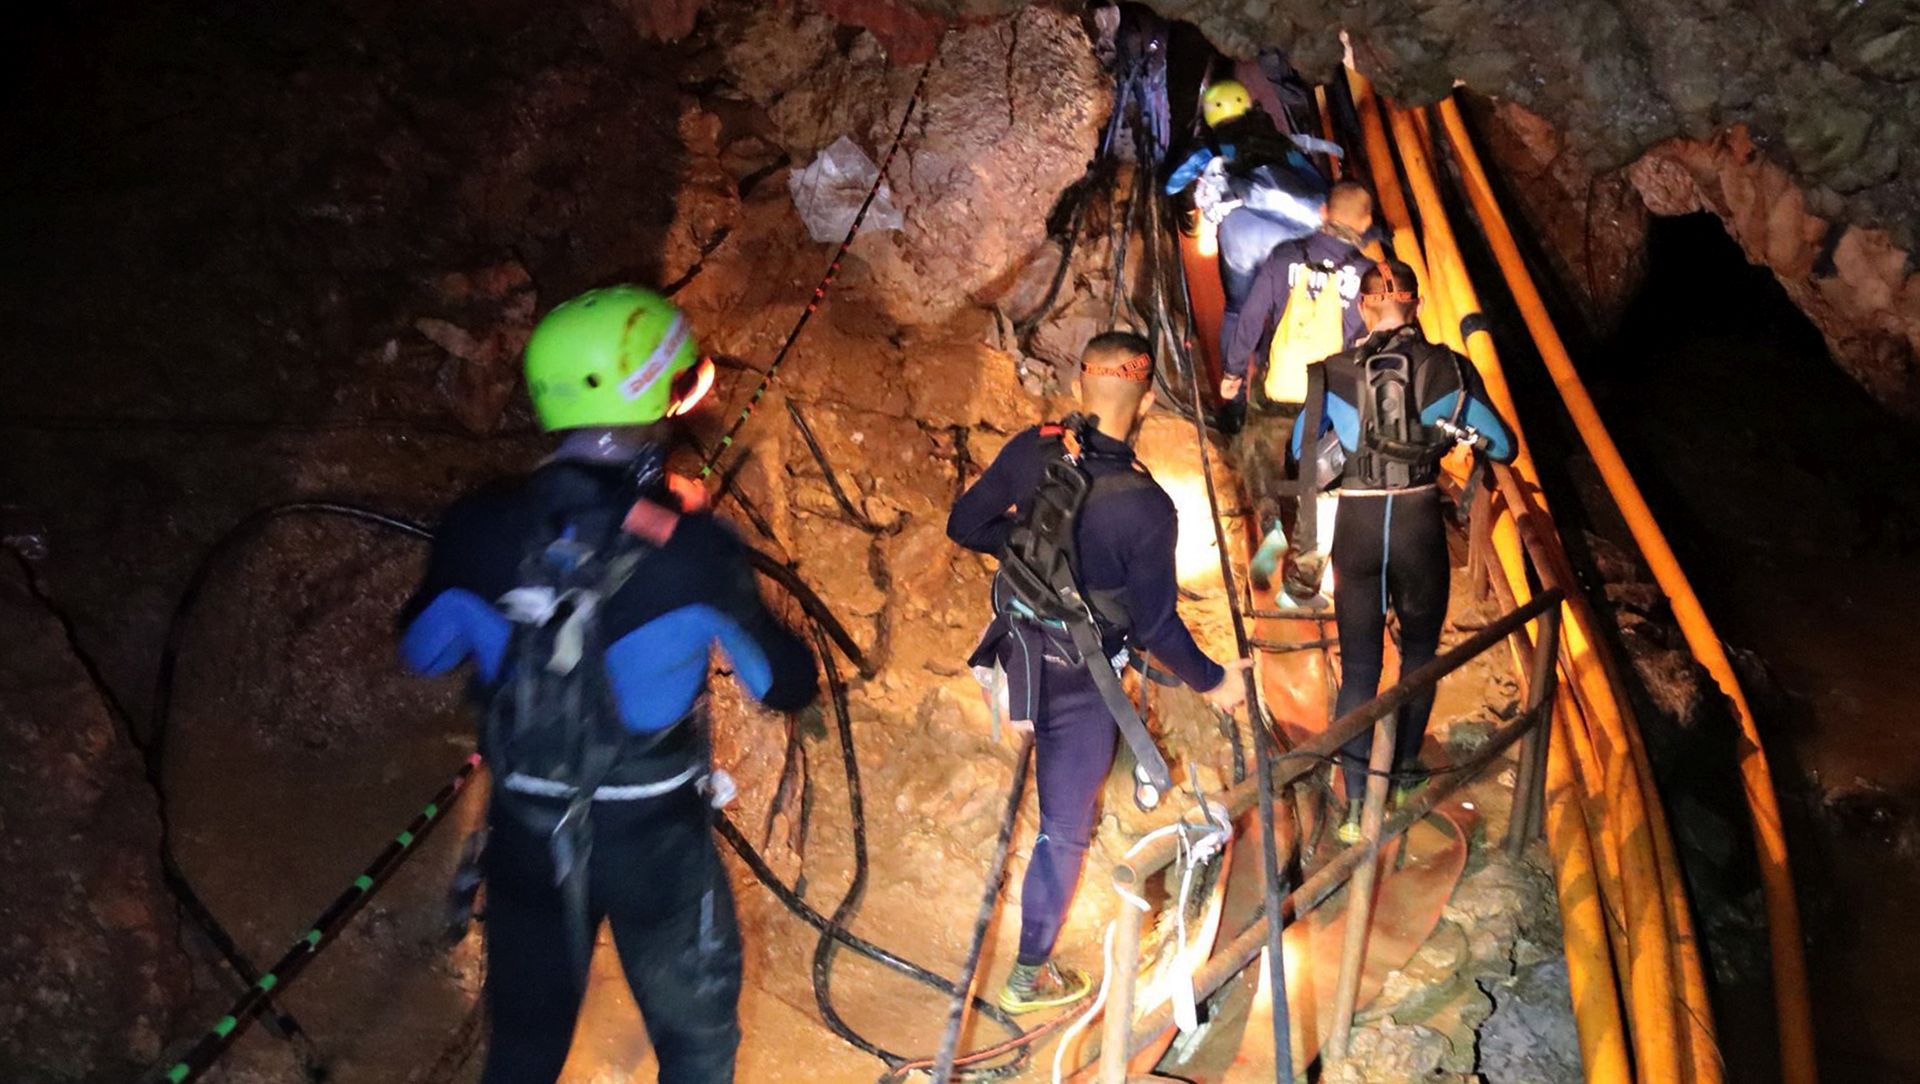 epa06870510 A handout photo made available by the Thai Royal Navy on 07 July 2018 shows Thai military personnel inside a cave complex during the ongoing rescue operations for the youth soccer team and their assistant coach, at Tham Luang cave in Khun Nam Nang Non Forest Park, Chiang Rai province, Thailand. Operations are underway to safely bring out the 13 members of youth soccer team including their assistant coach who have been trapped in Tham Luang cave since 23 June 2018.  EPA/ROYAL THAI NAVY / HANDOUT  HANDOUT EDITORIAL USE ONLY/NO SALES